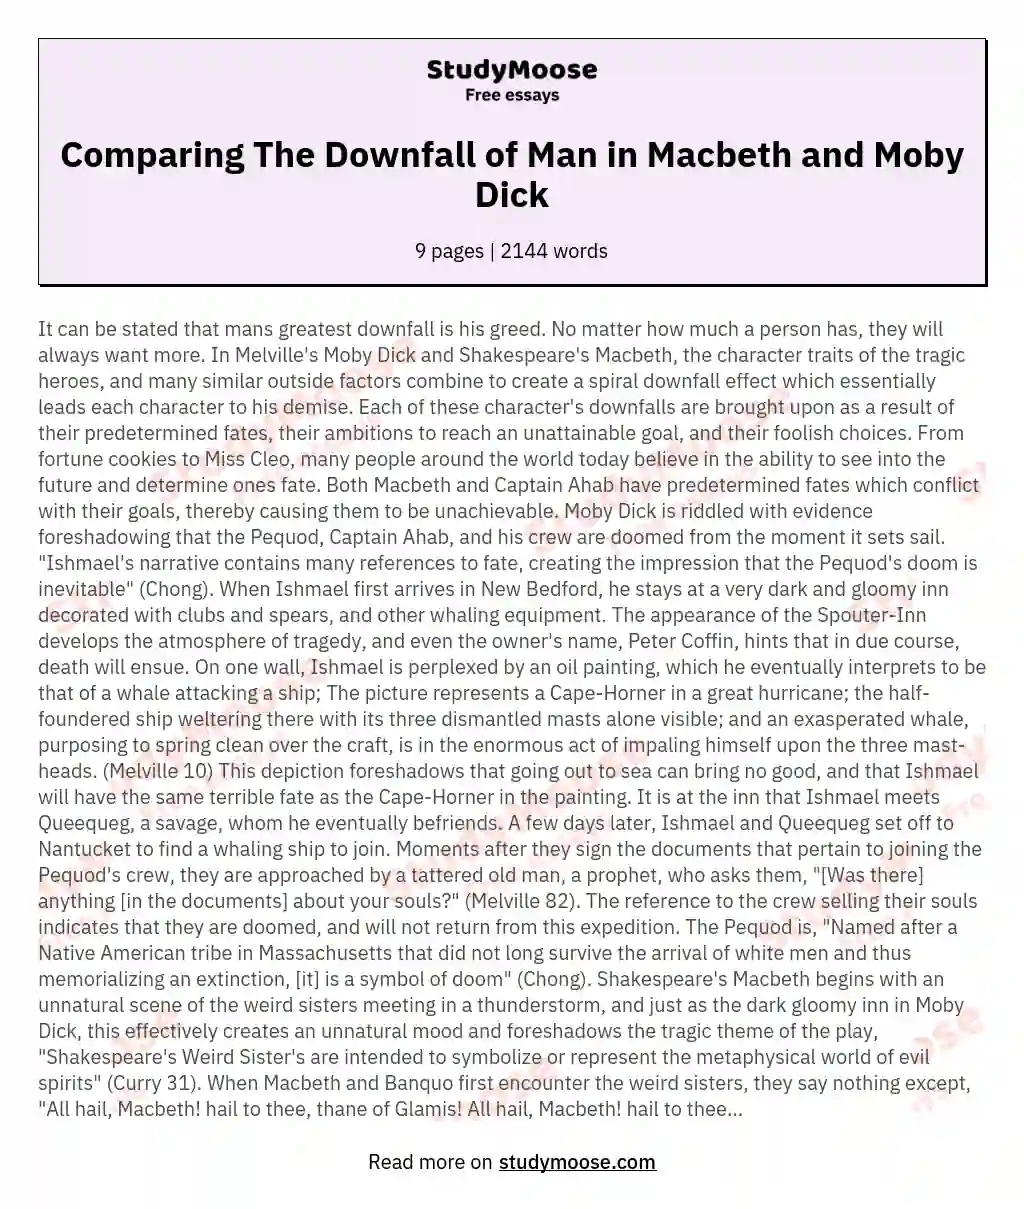 Comparing The Downfall of Man in Macbeth and Moby Dick